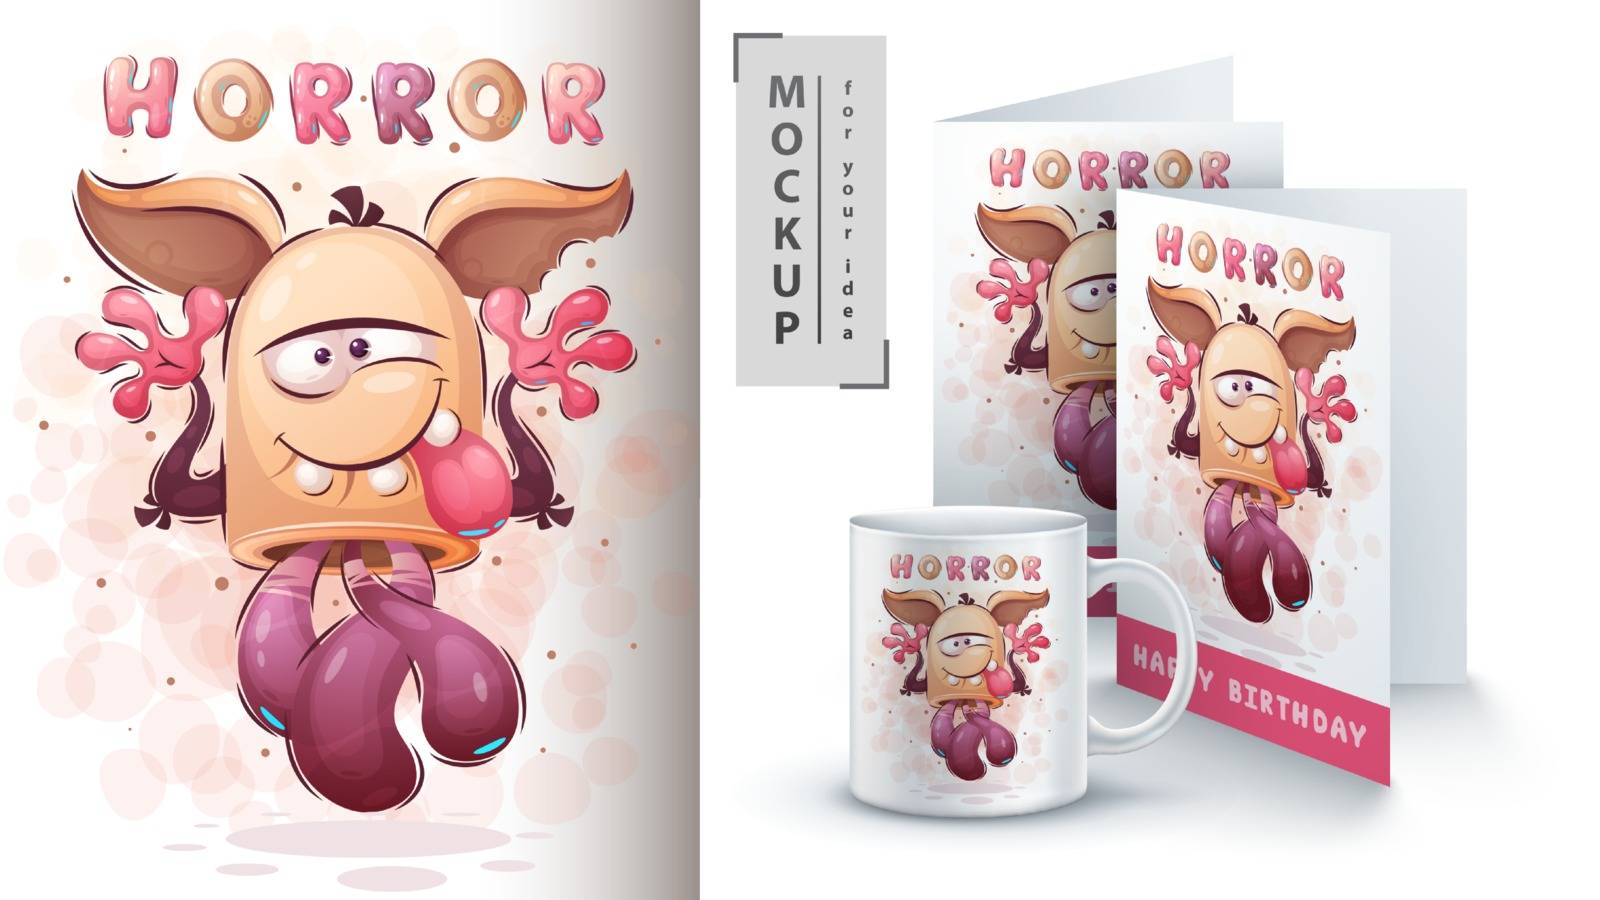 Cute monster - poster and merchandising. Vector eps 10